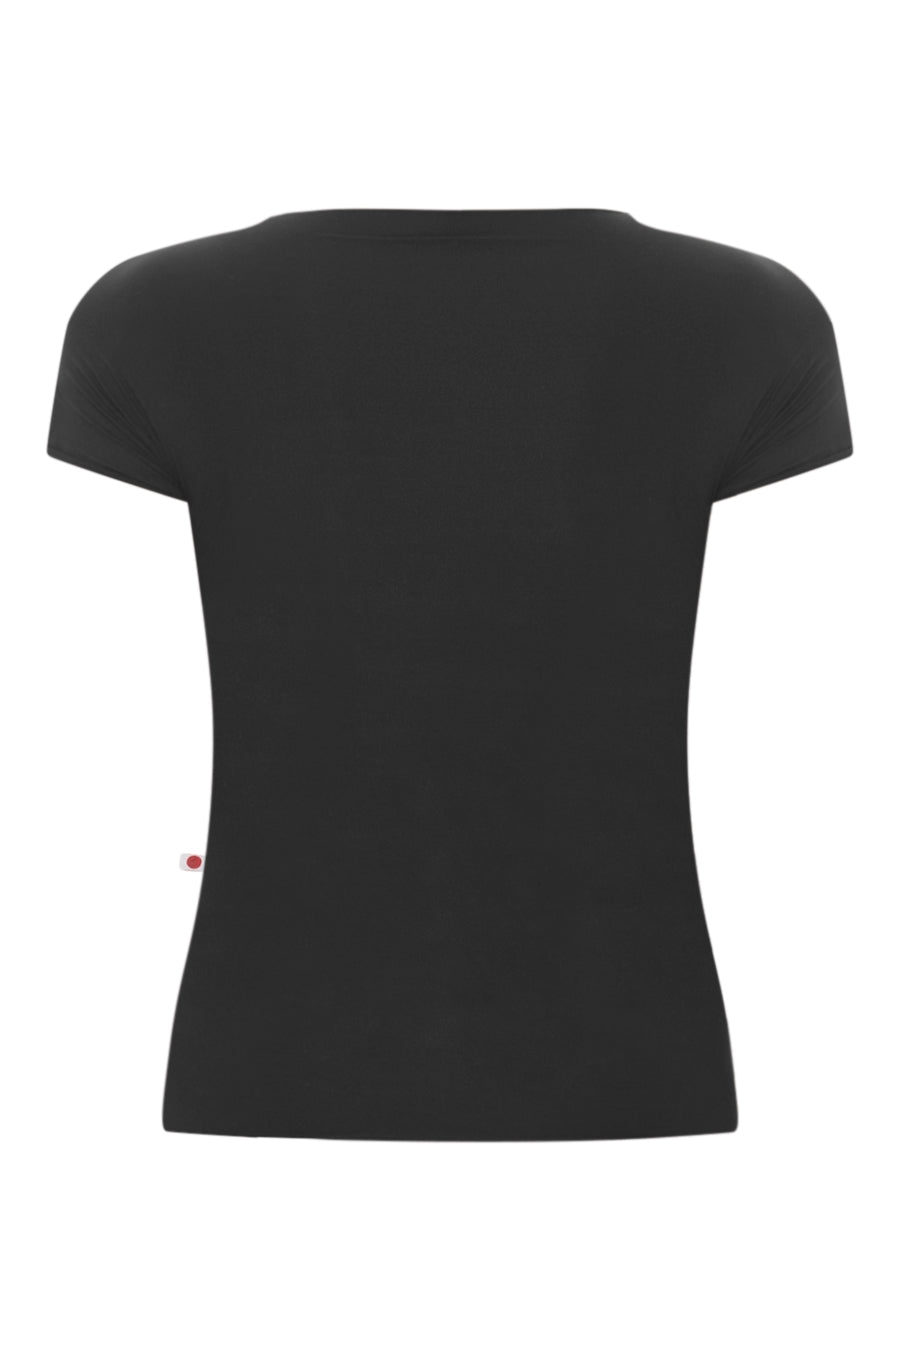 Amazing short sleeved top in A-Black